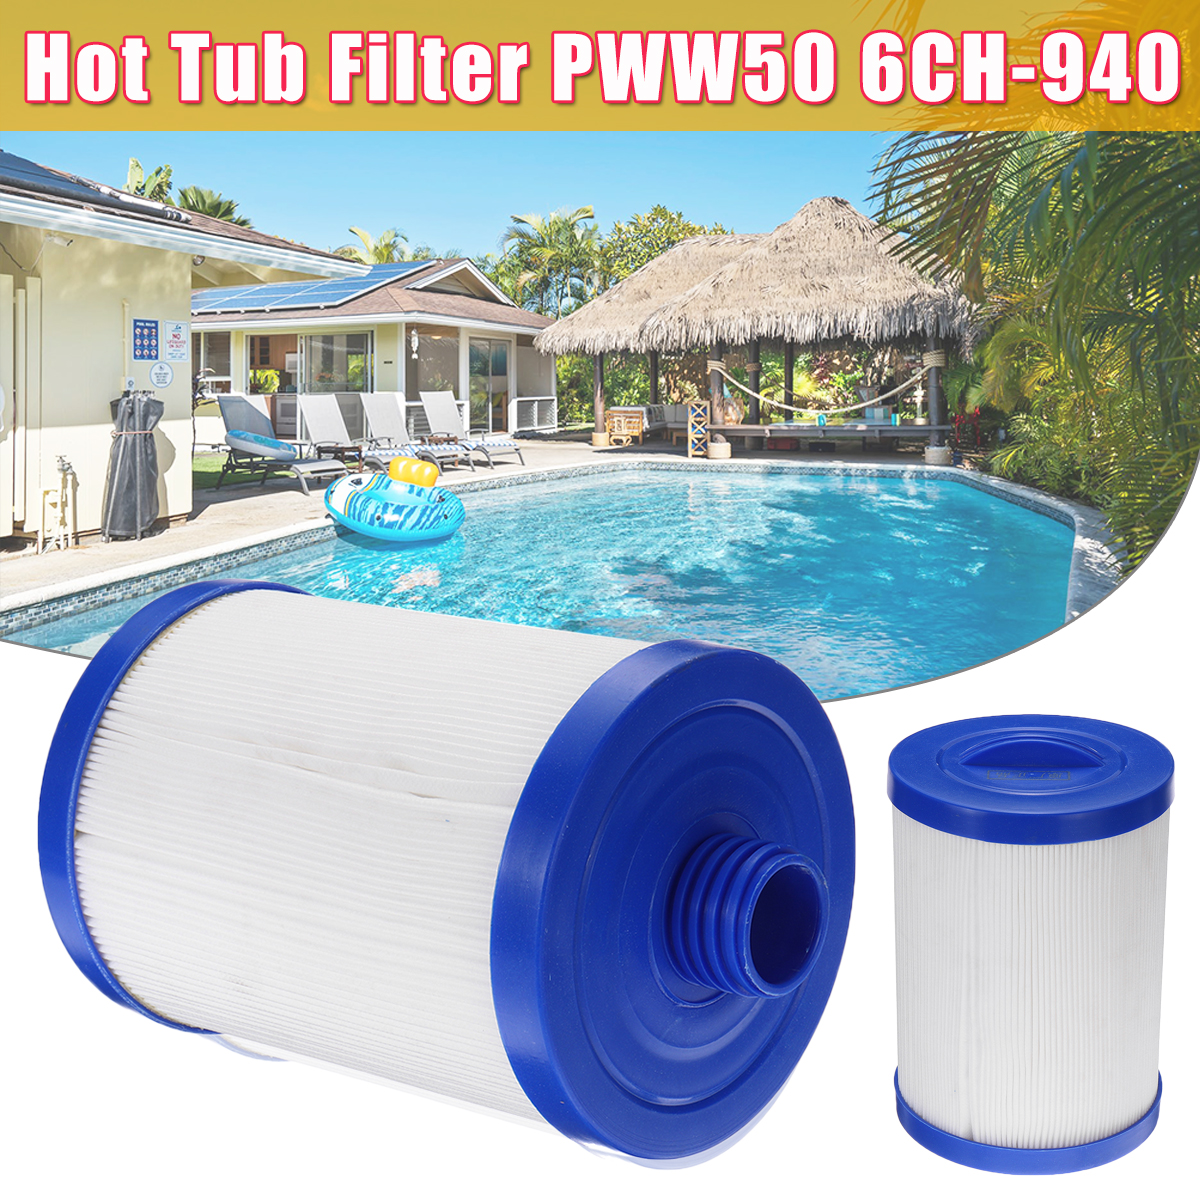 243X150mm Hot Tub Filter for PWW50 6CH-940 Spa Tub Element Filter Tub Swimming Pool Accessories